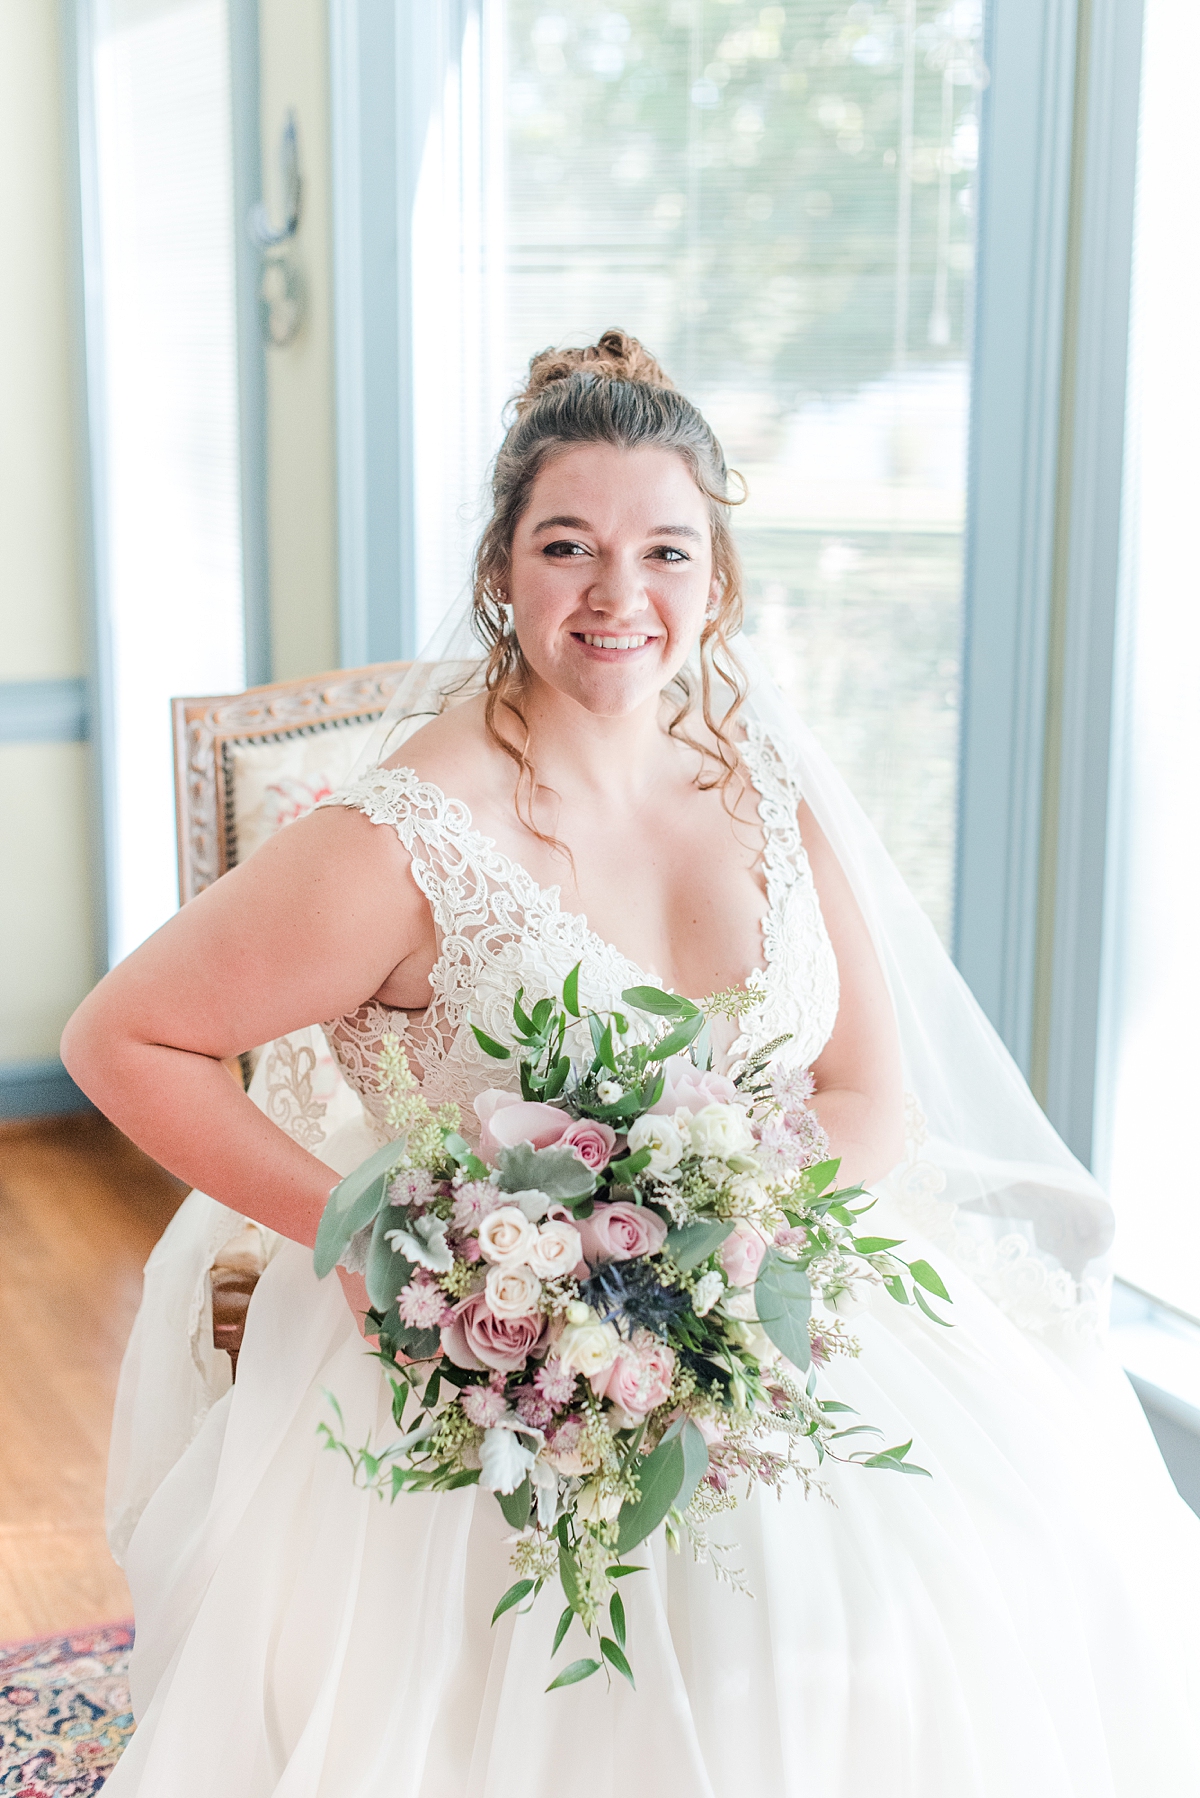 Bridal Portraits on with Veil at Lake Front Fall Wedding. Wedding Photography by Richmond Wedding Photographer Kailey Brianne Photography. 